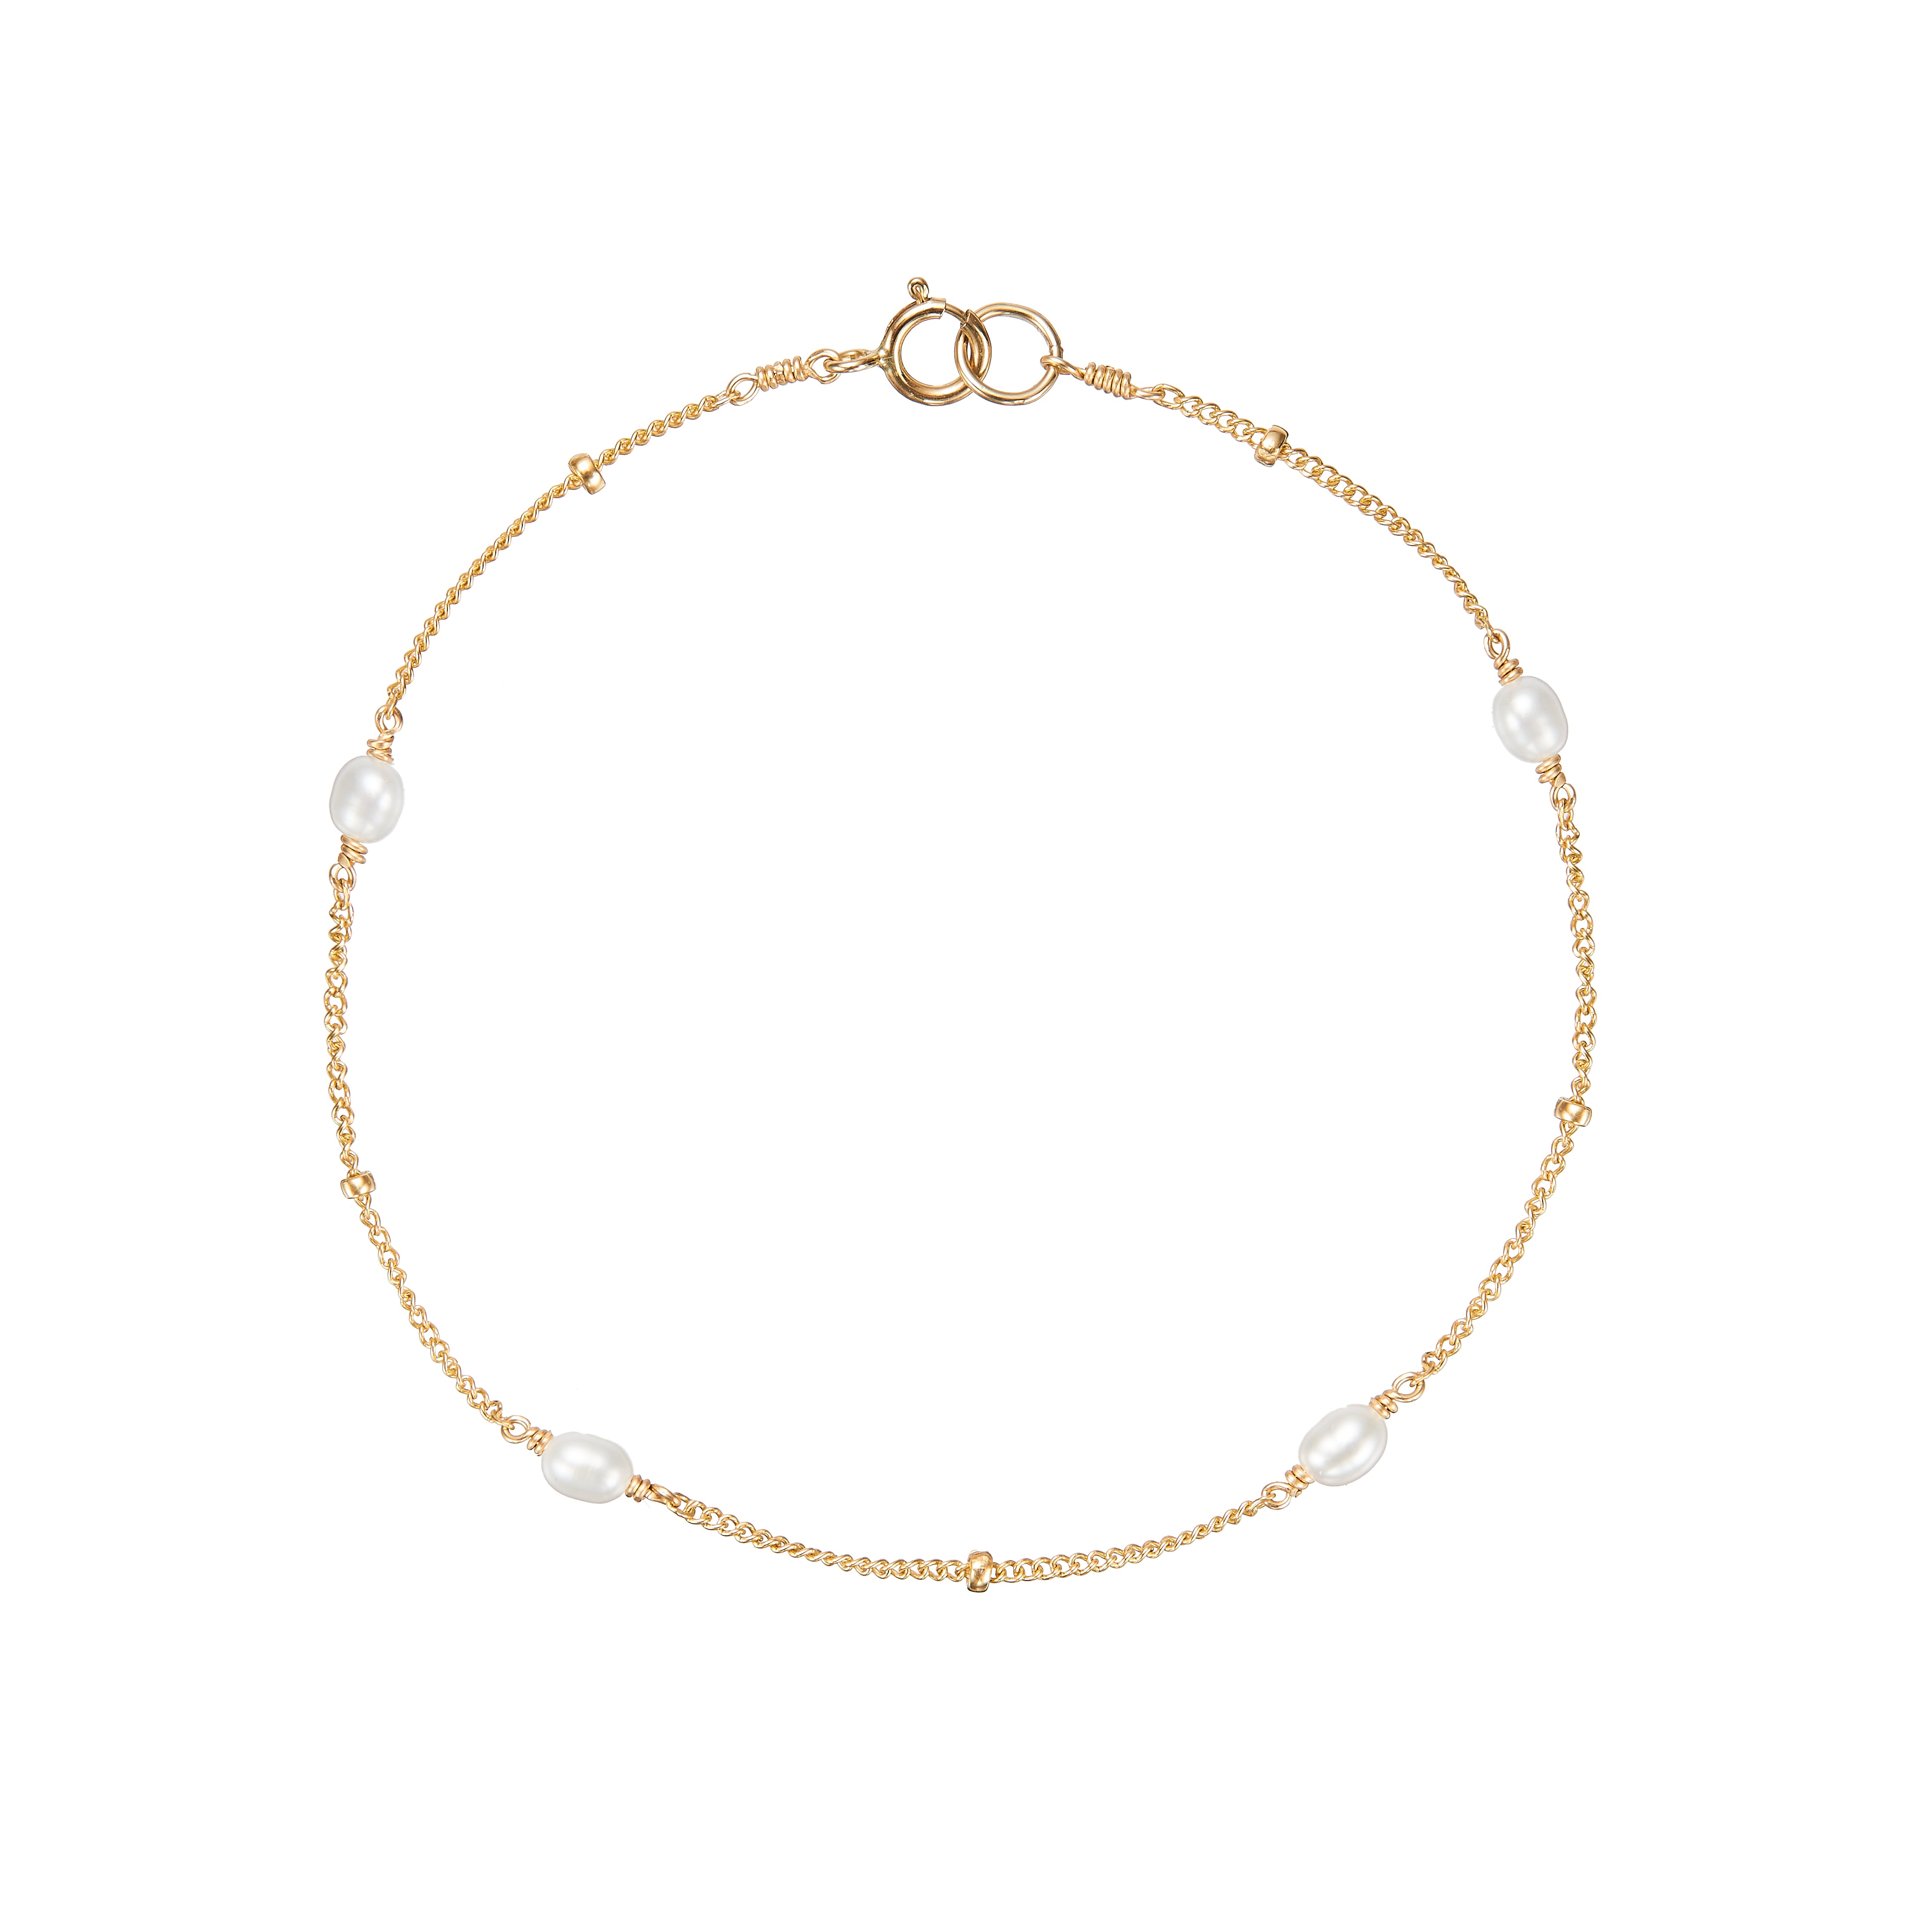 Gold seed pearl satellite bracelet on a white background